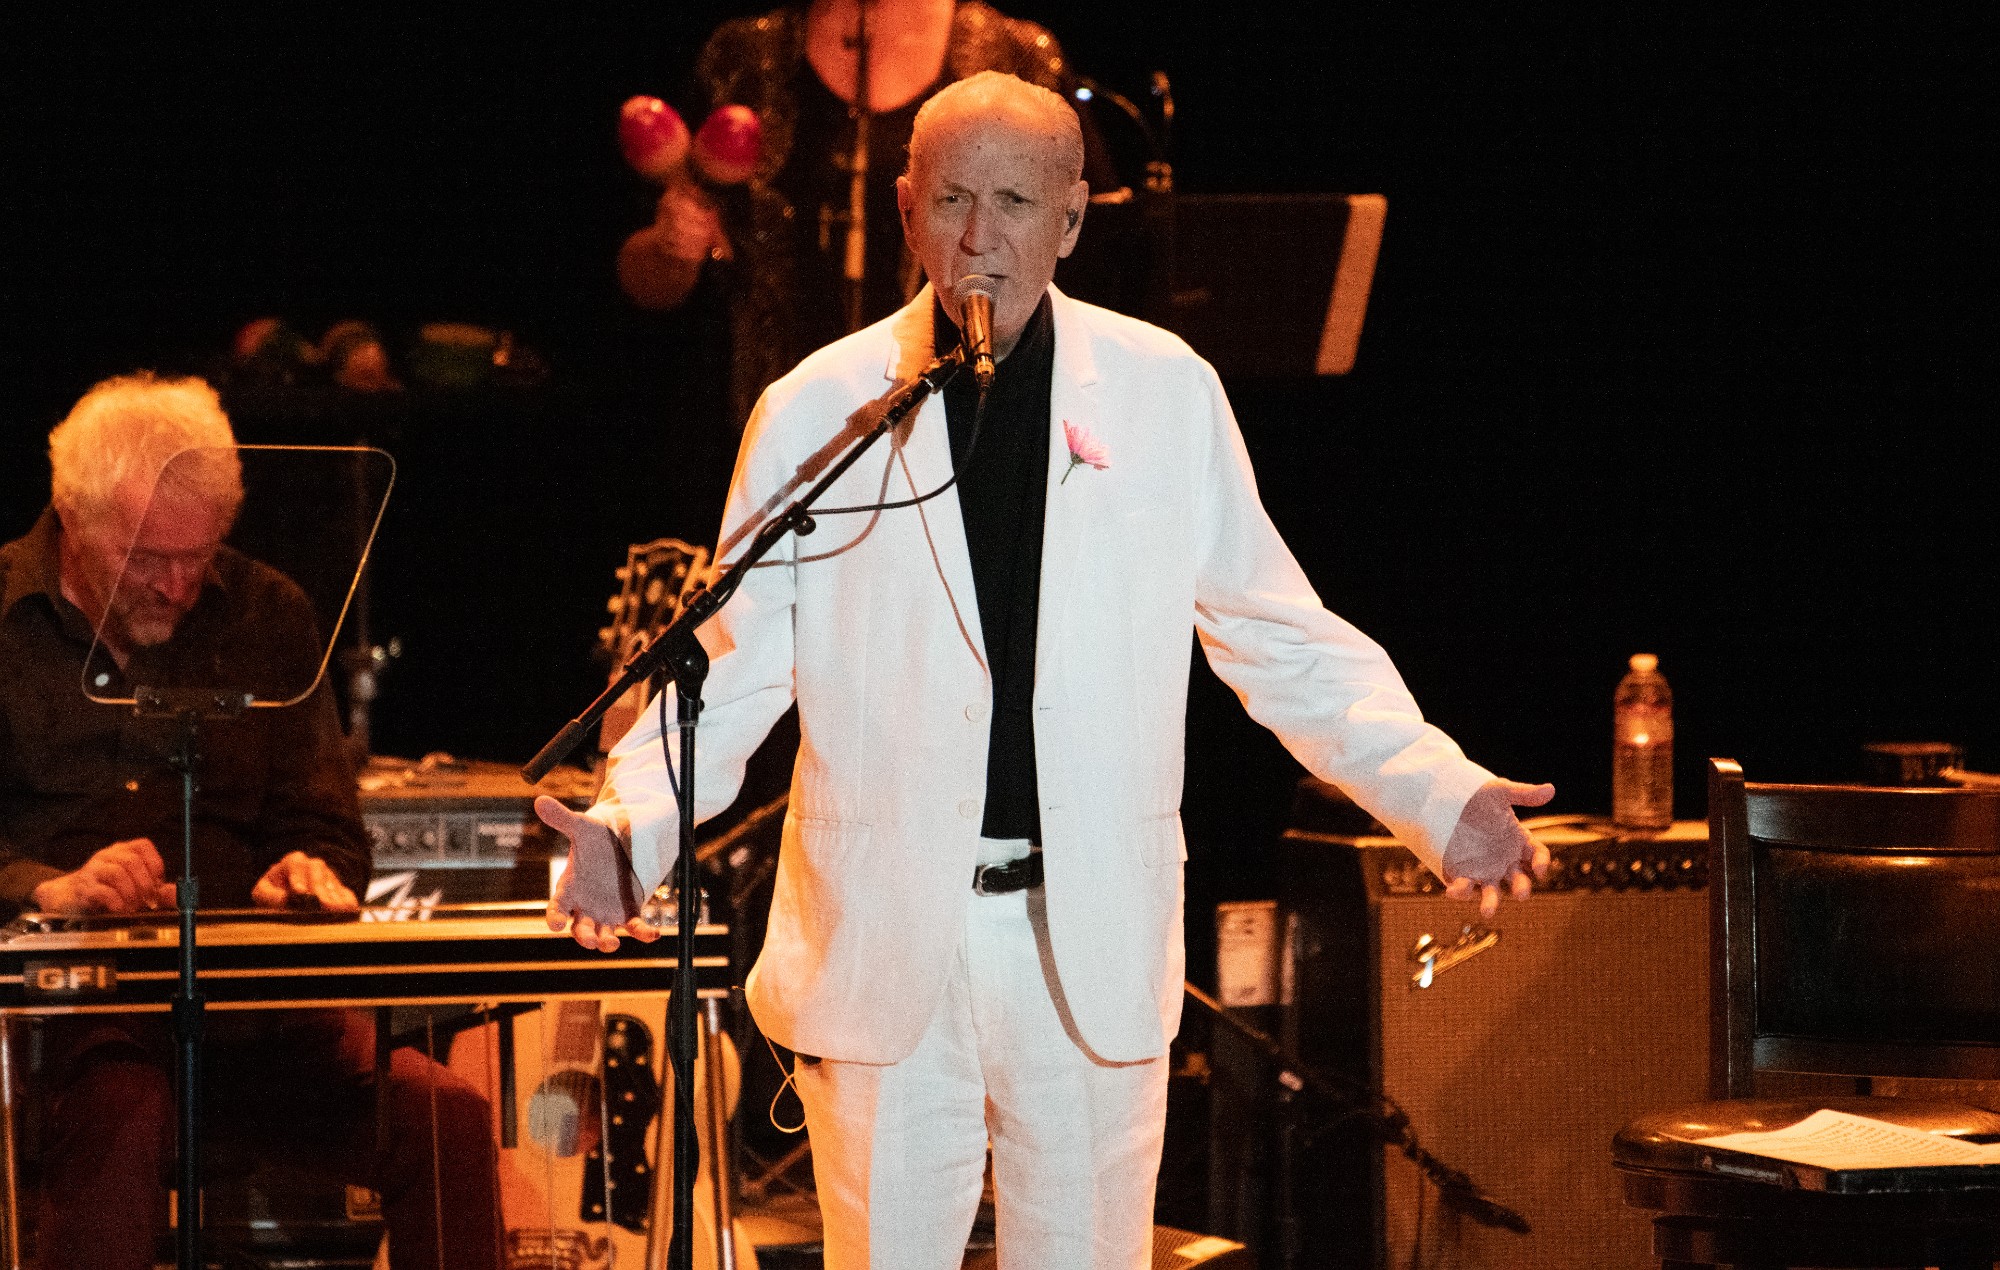 Michael Nesmith wearing a white suit